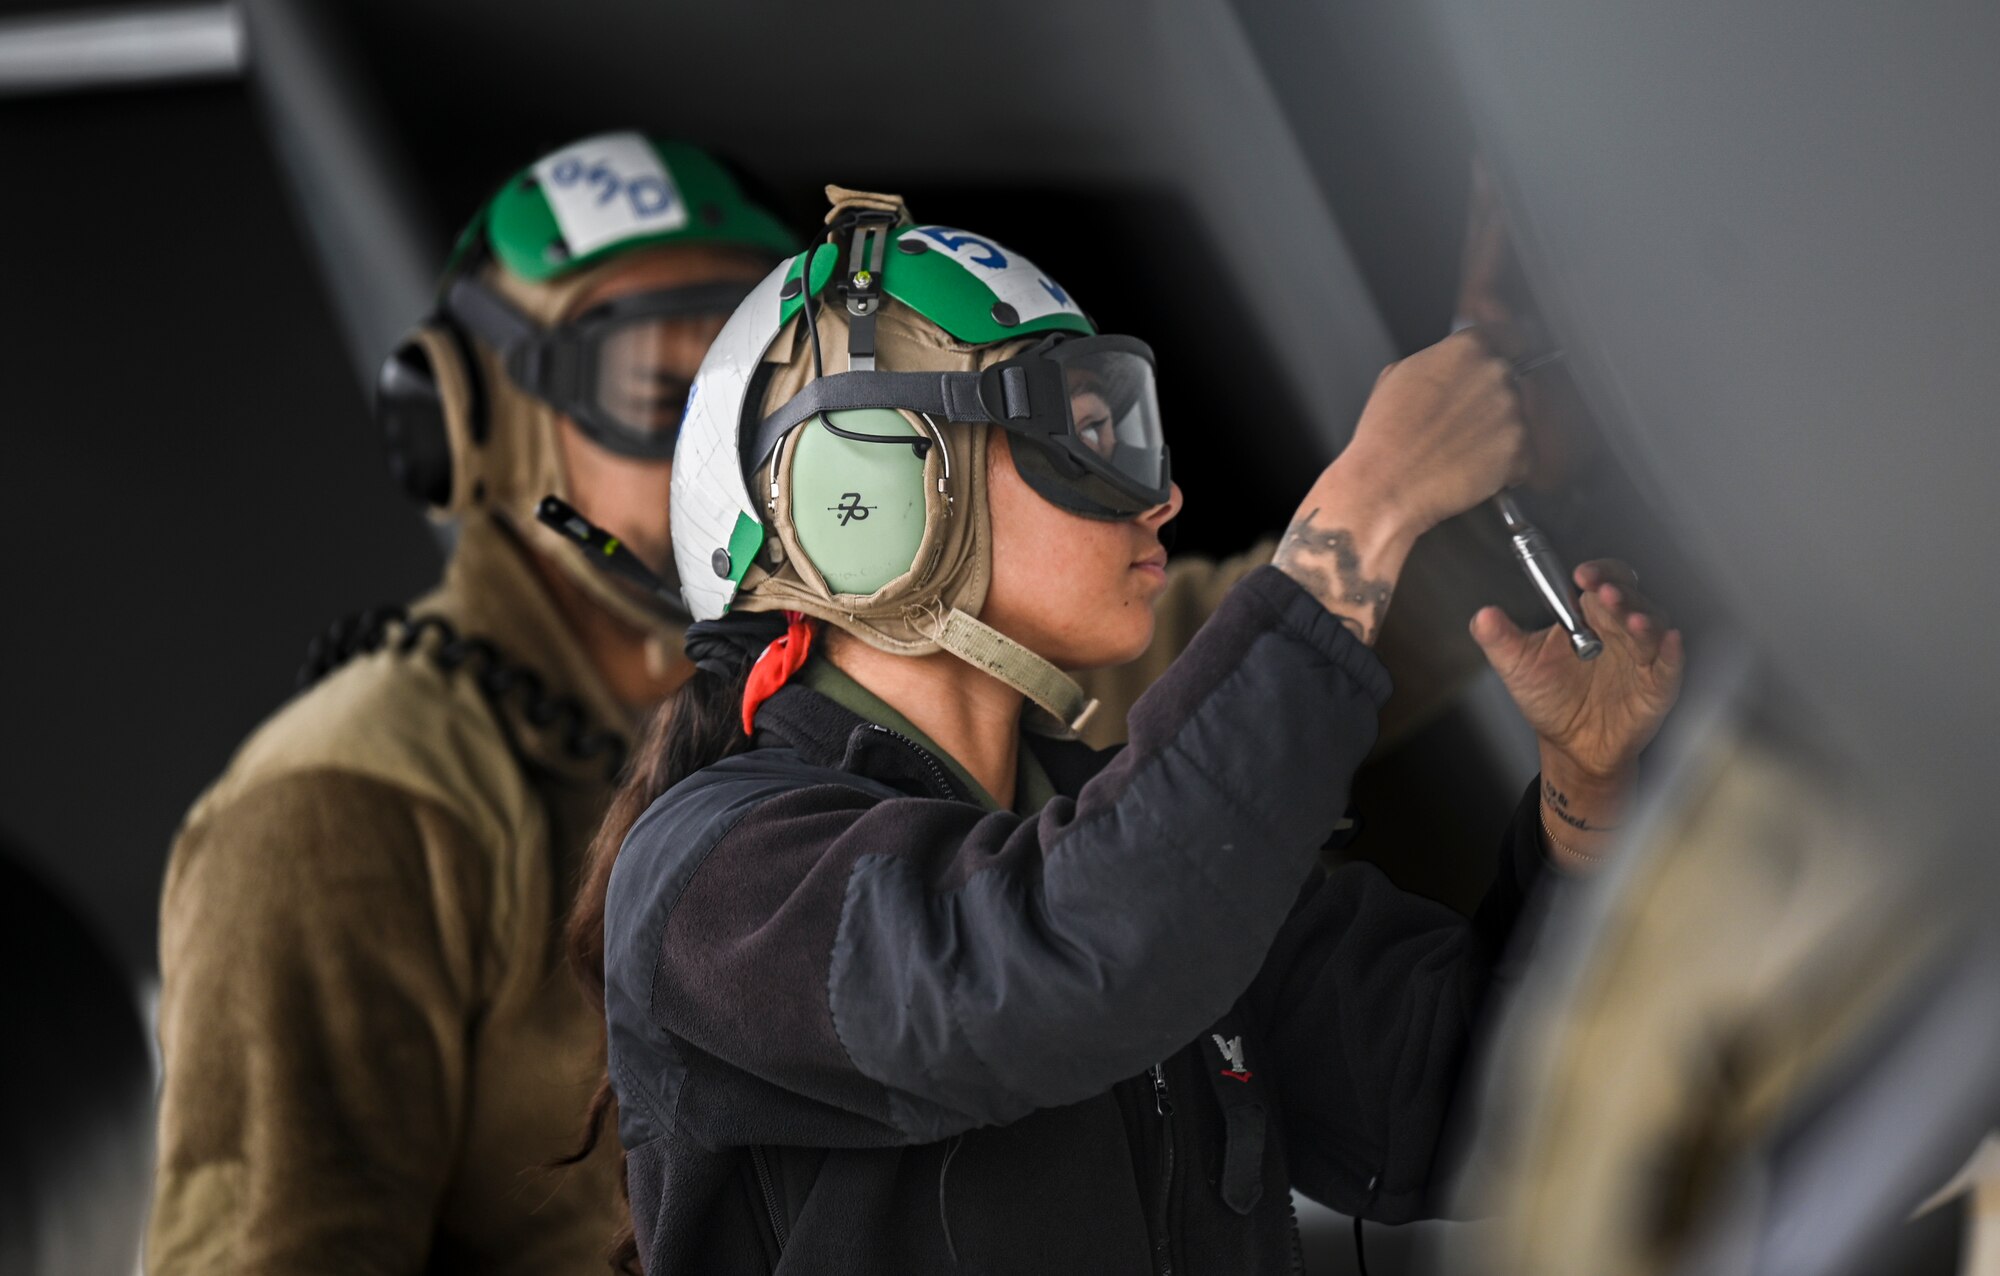 U.S. Navy Petty Officer 3rd Class Alexus Tesi, aviation mechanist mate assigned to Electronic Attack Squadron 131 at Naval Air Station Whidbey Island, Washington, perform preflight procedures on an EA-18G Growler during Vigilant Storm 23 at Osan Air Base, Republic of Korea, Nov. 1, 2022.